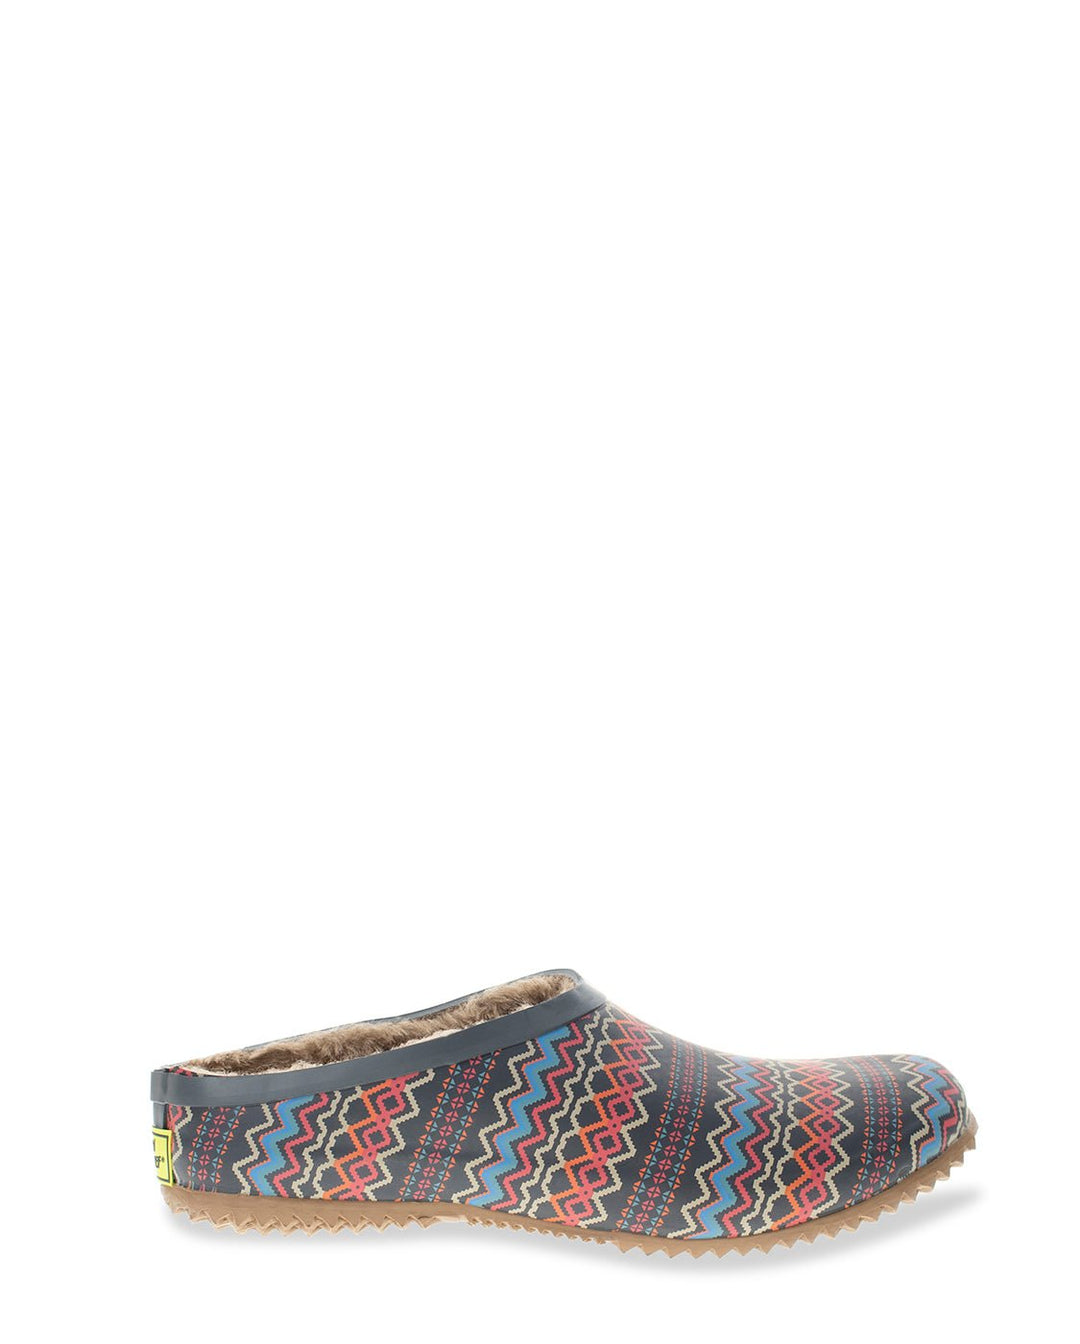 Women's Country Stripe Clog - Gray - Western Chief